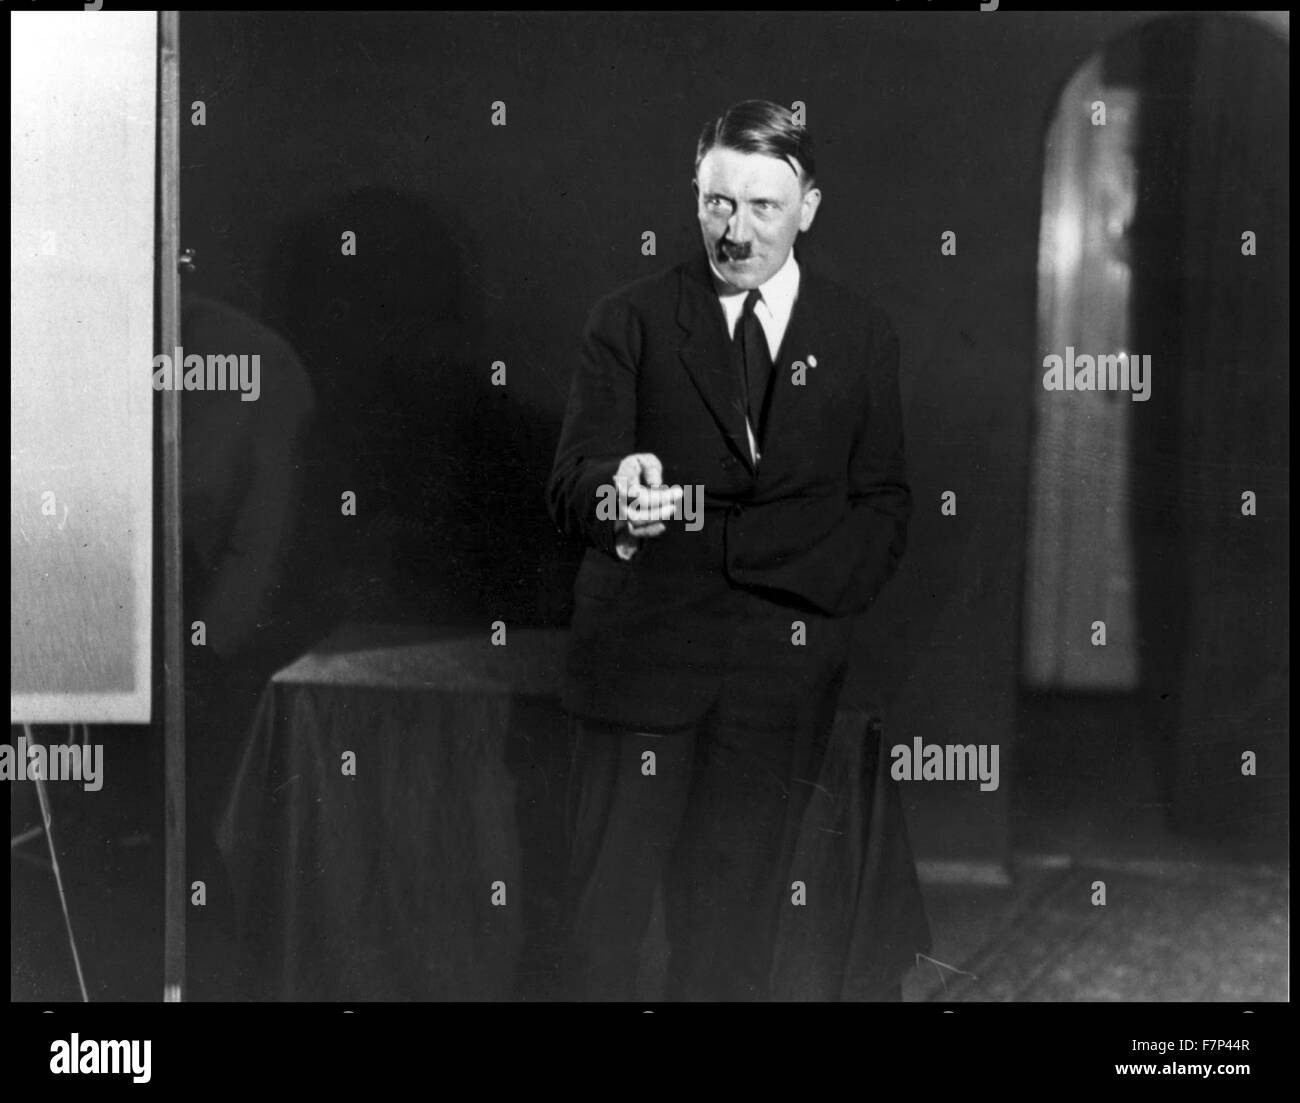 German Nazi leader Adolf Hitler (1889-1945) Austrian-born German politician who was the leader of the Nazi Party, rehearsing a speech in front of the mirror. Dated 1933 Stock Photo